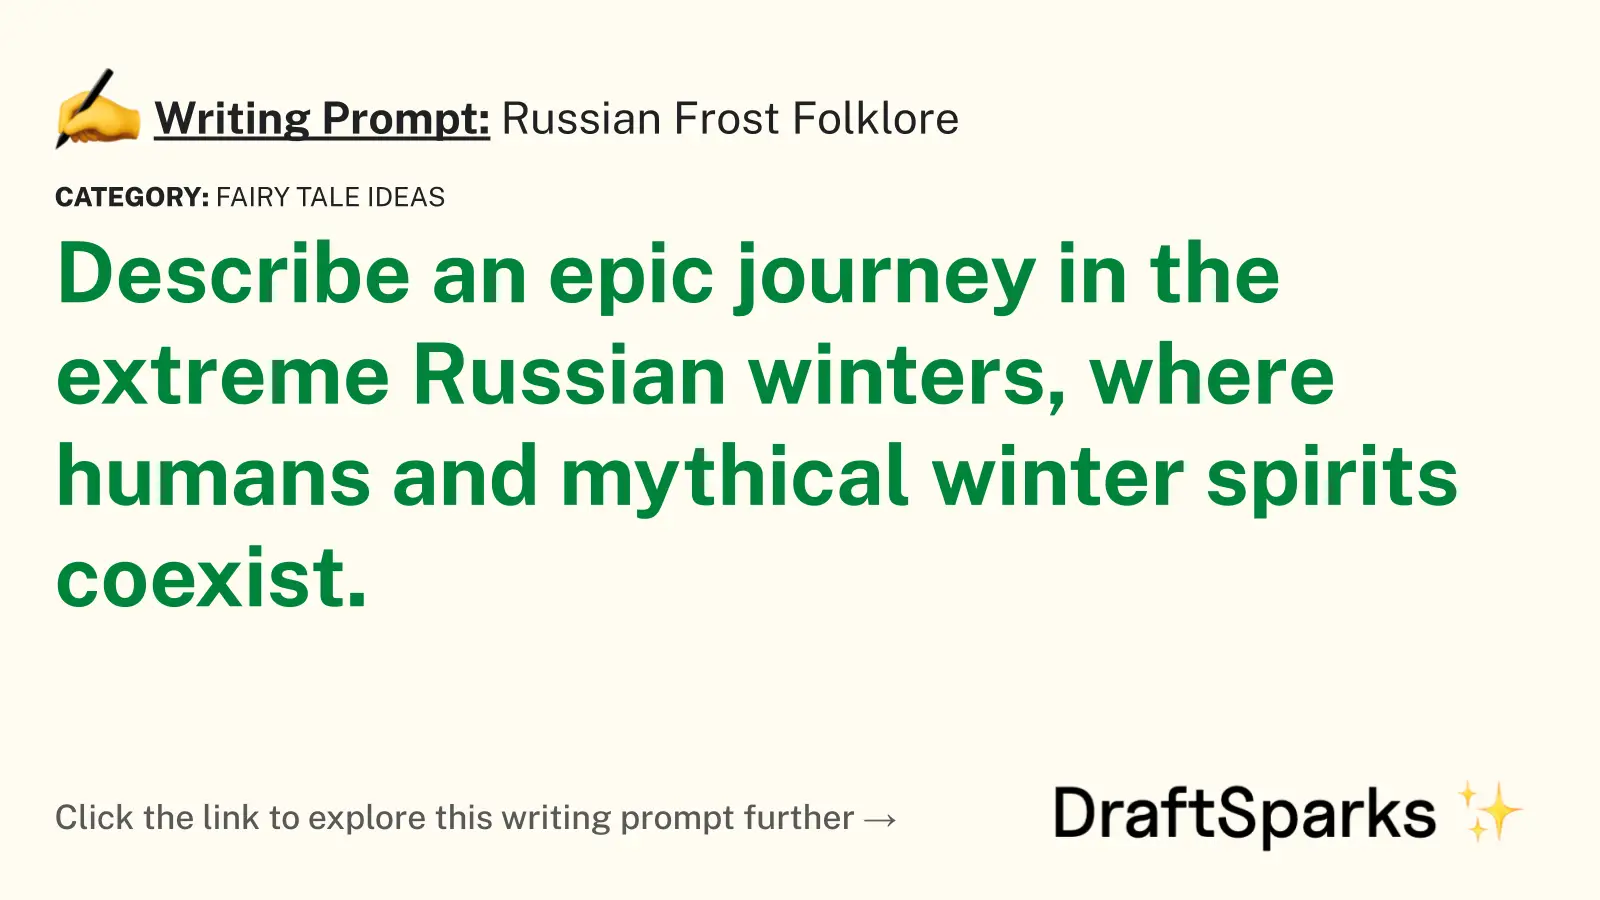 Russian Frost Folklore